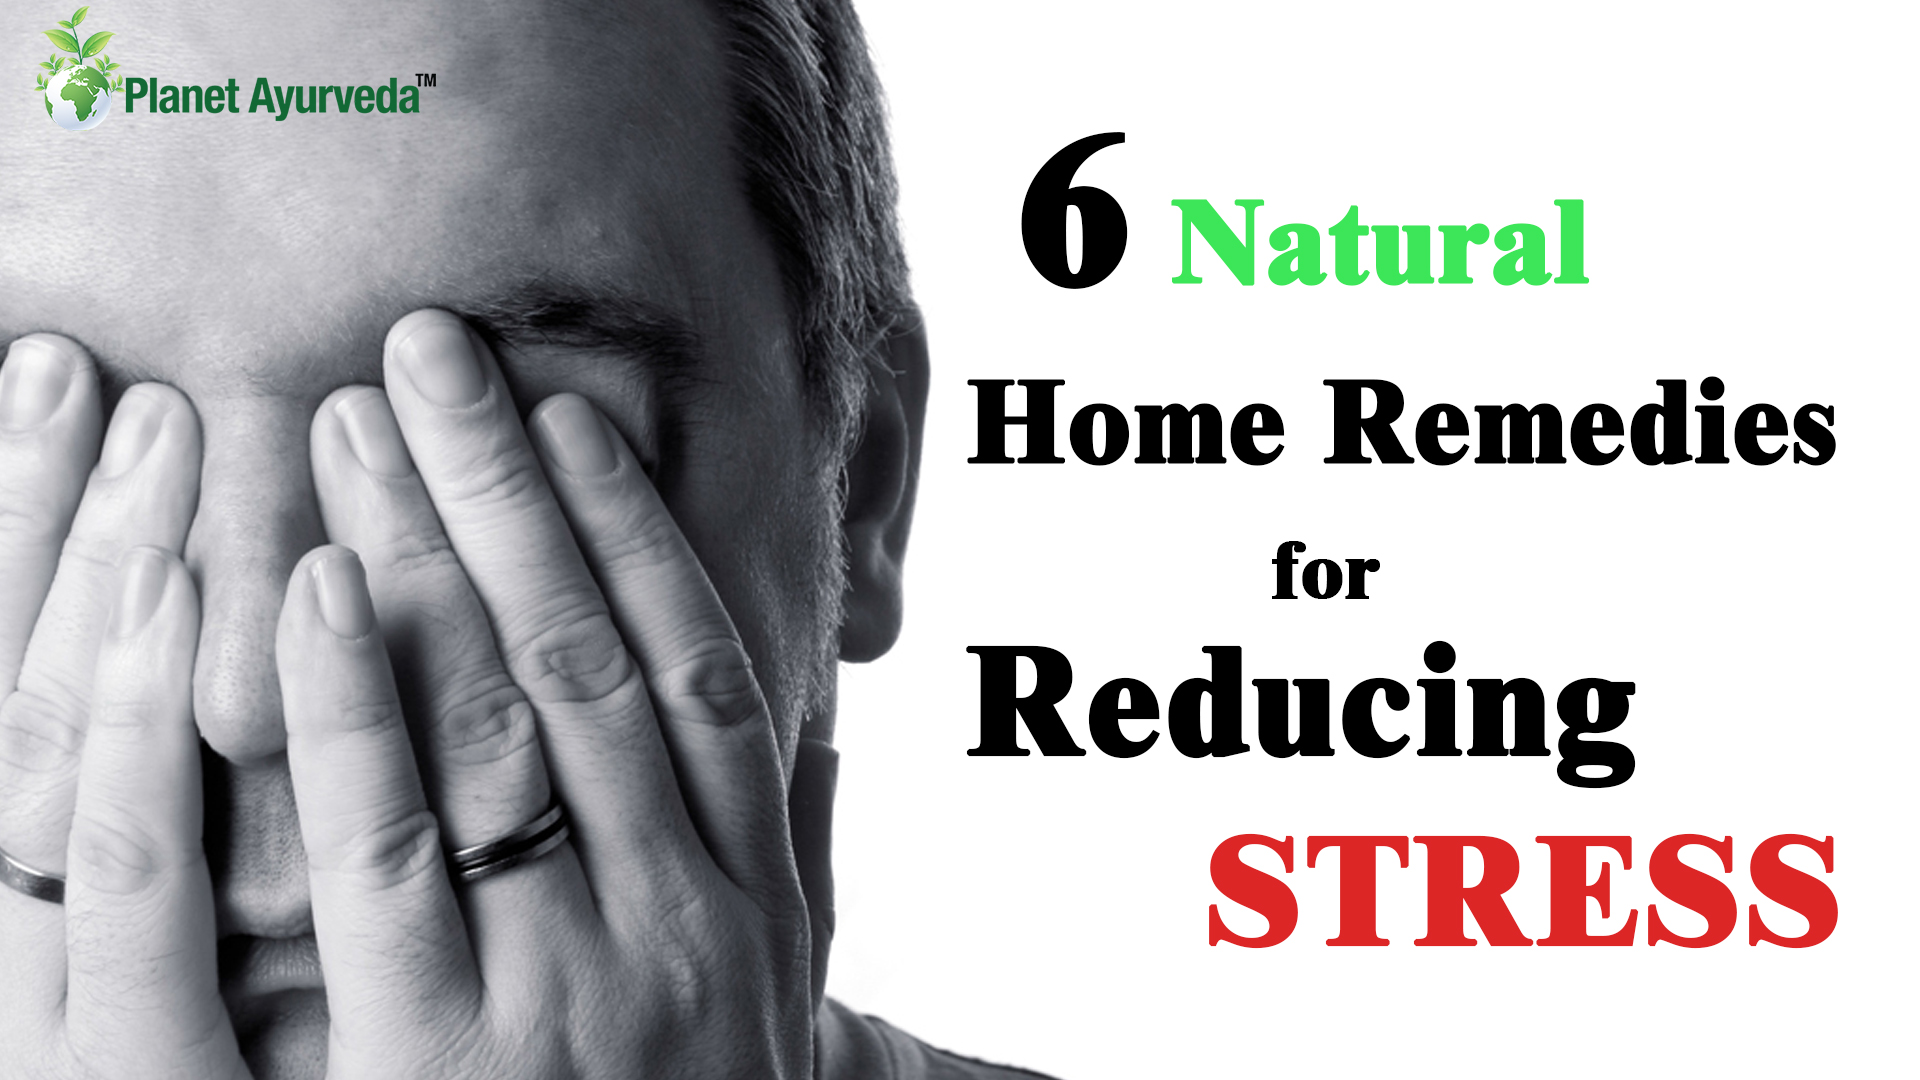 6 Natural Home Remedies for Reducing STRESS